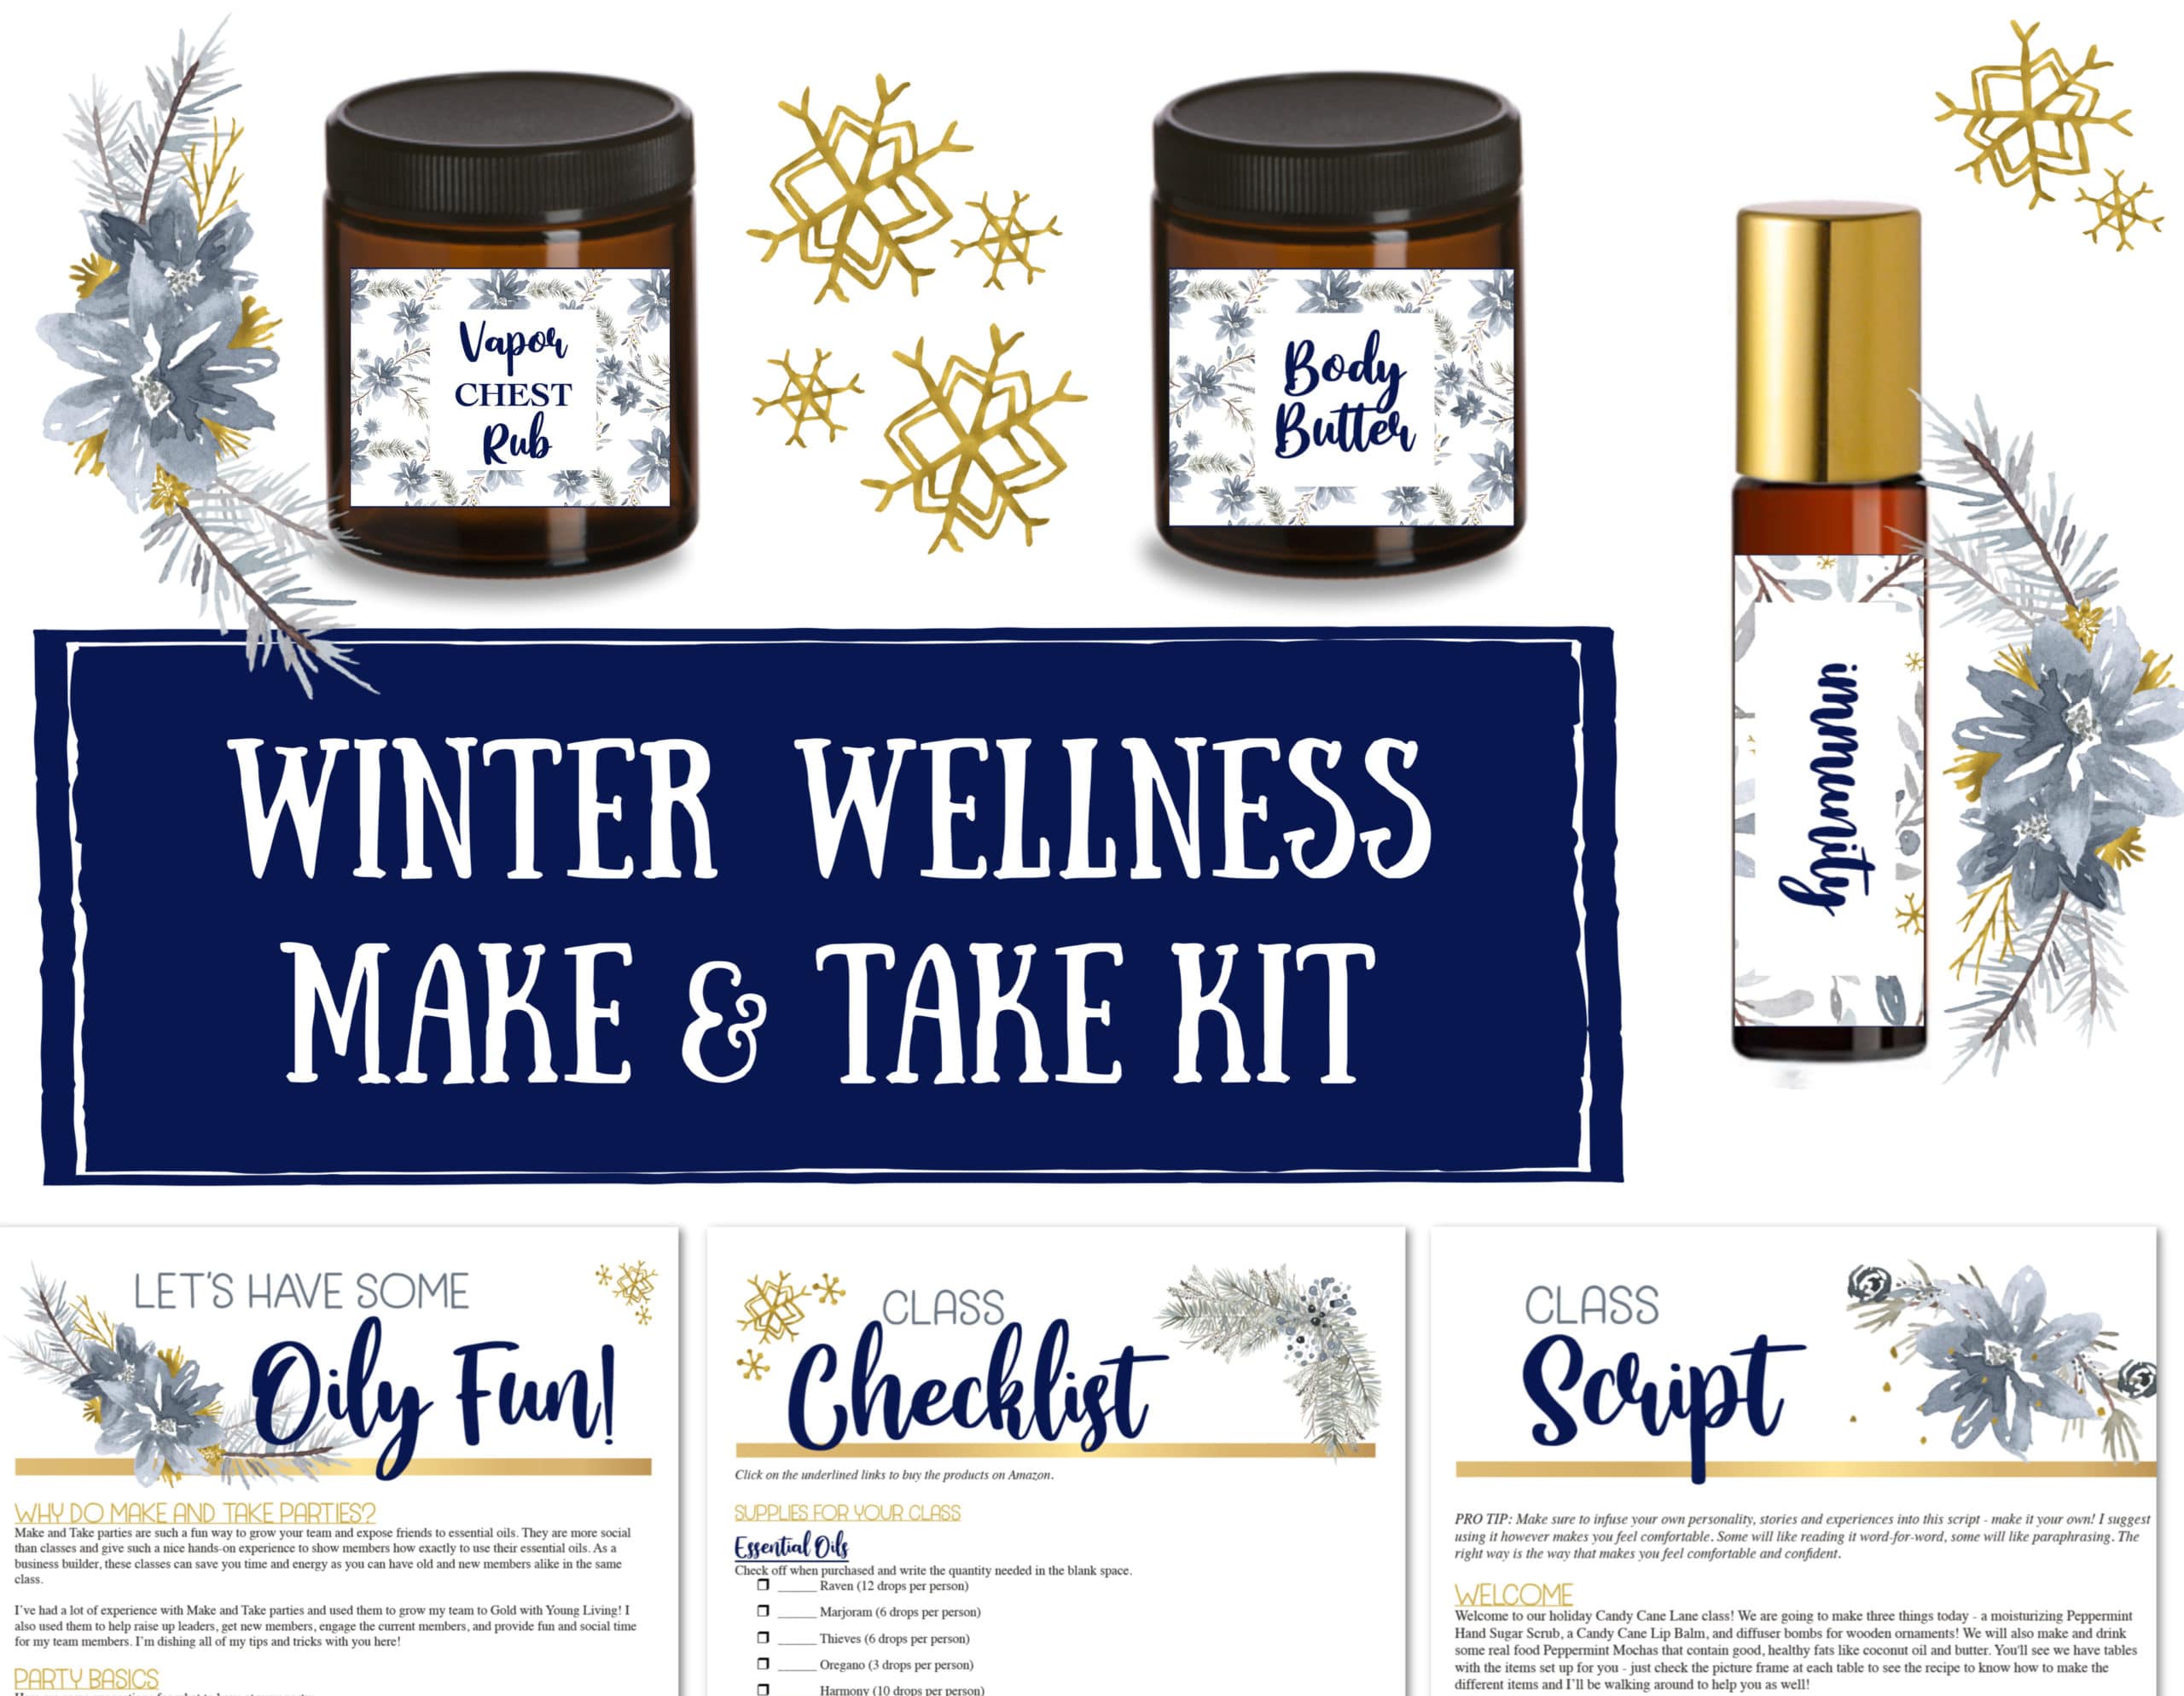 Winter Wellness Make and Take Class Kit on Etsy